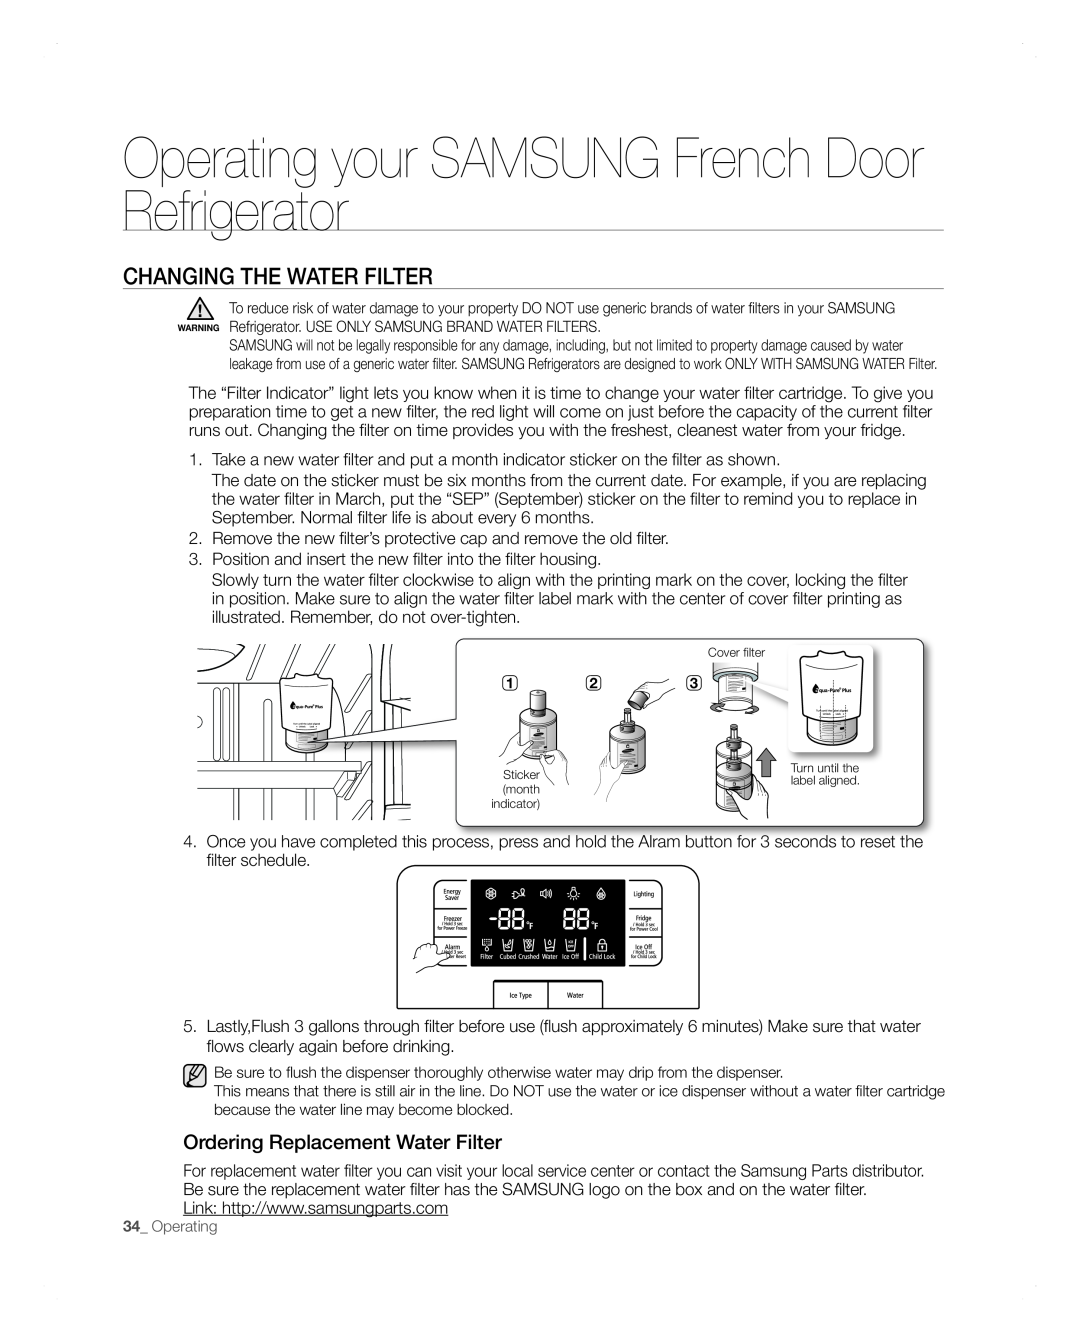 Samsung RFG297AARS user manual CHAnGinG tHE wAtER FiLtER, Operating your SAMSUNG French Door Refrigerator 